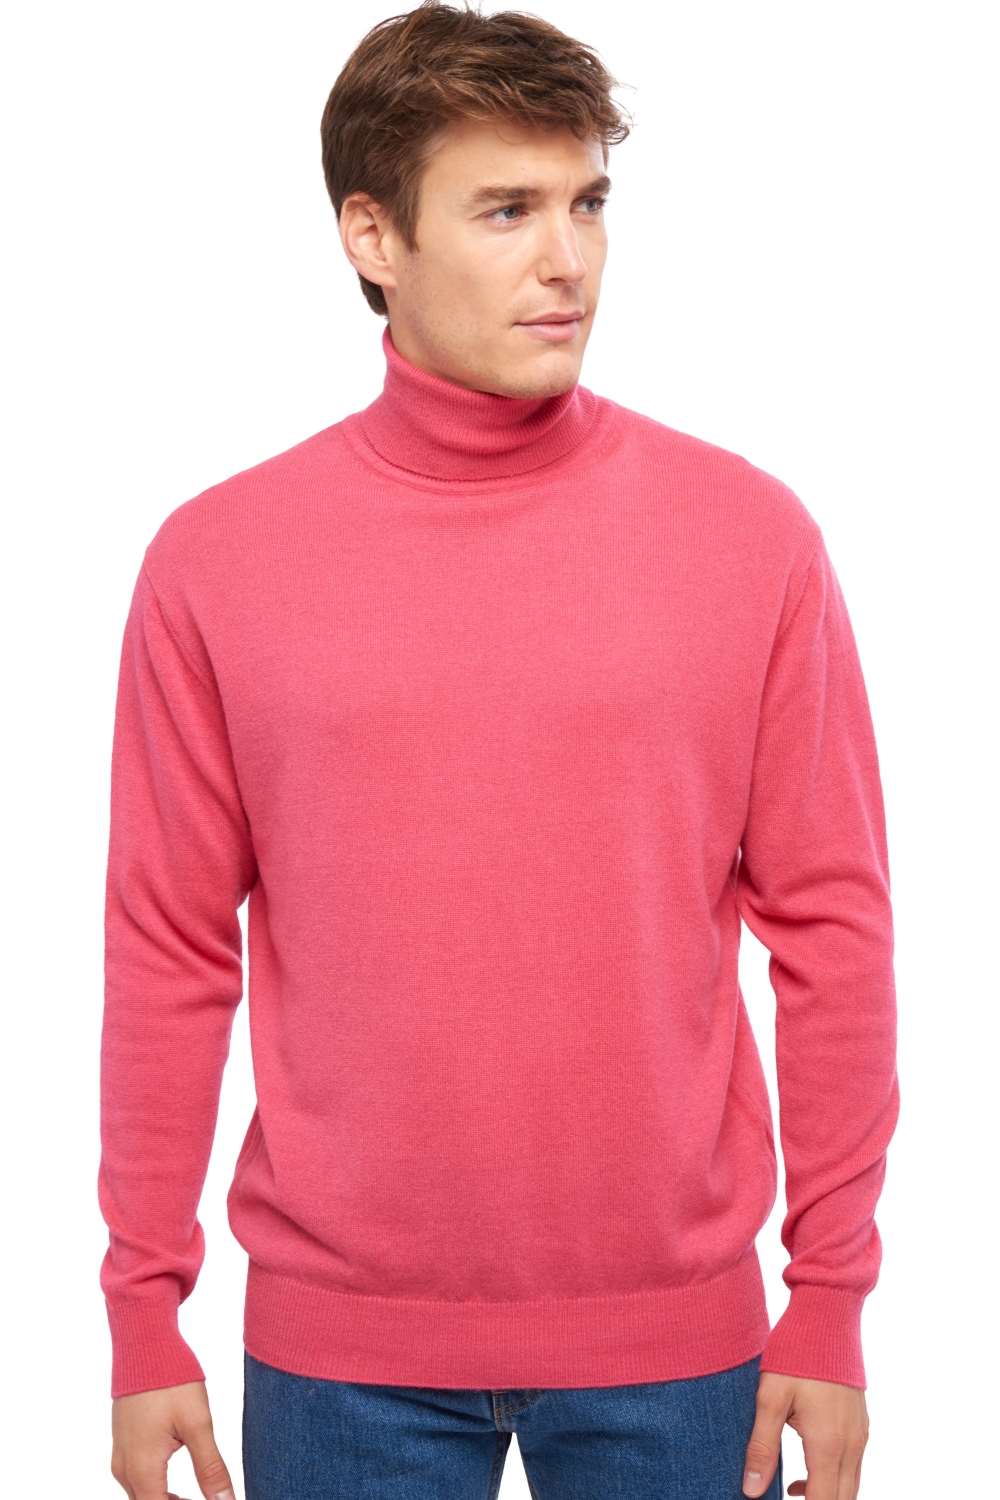 Cachemire pull homme col roule edgar rose shocking xs